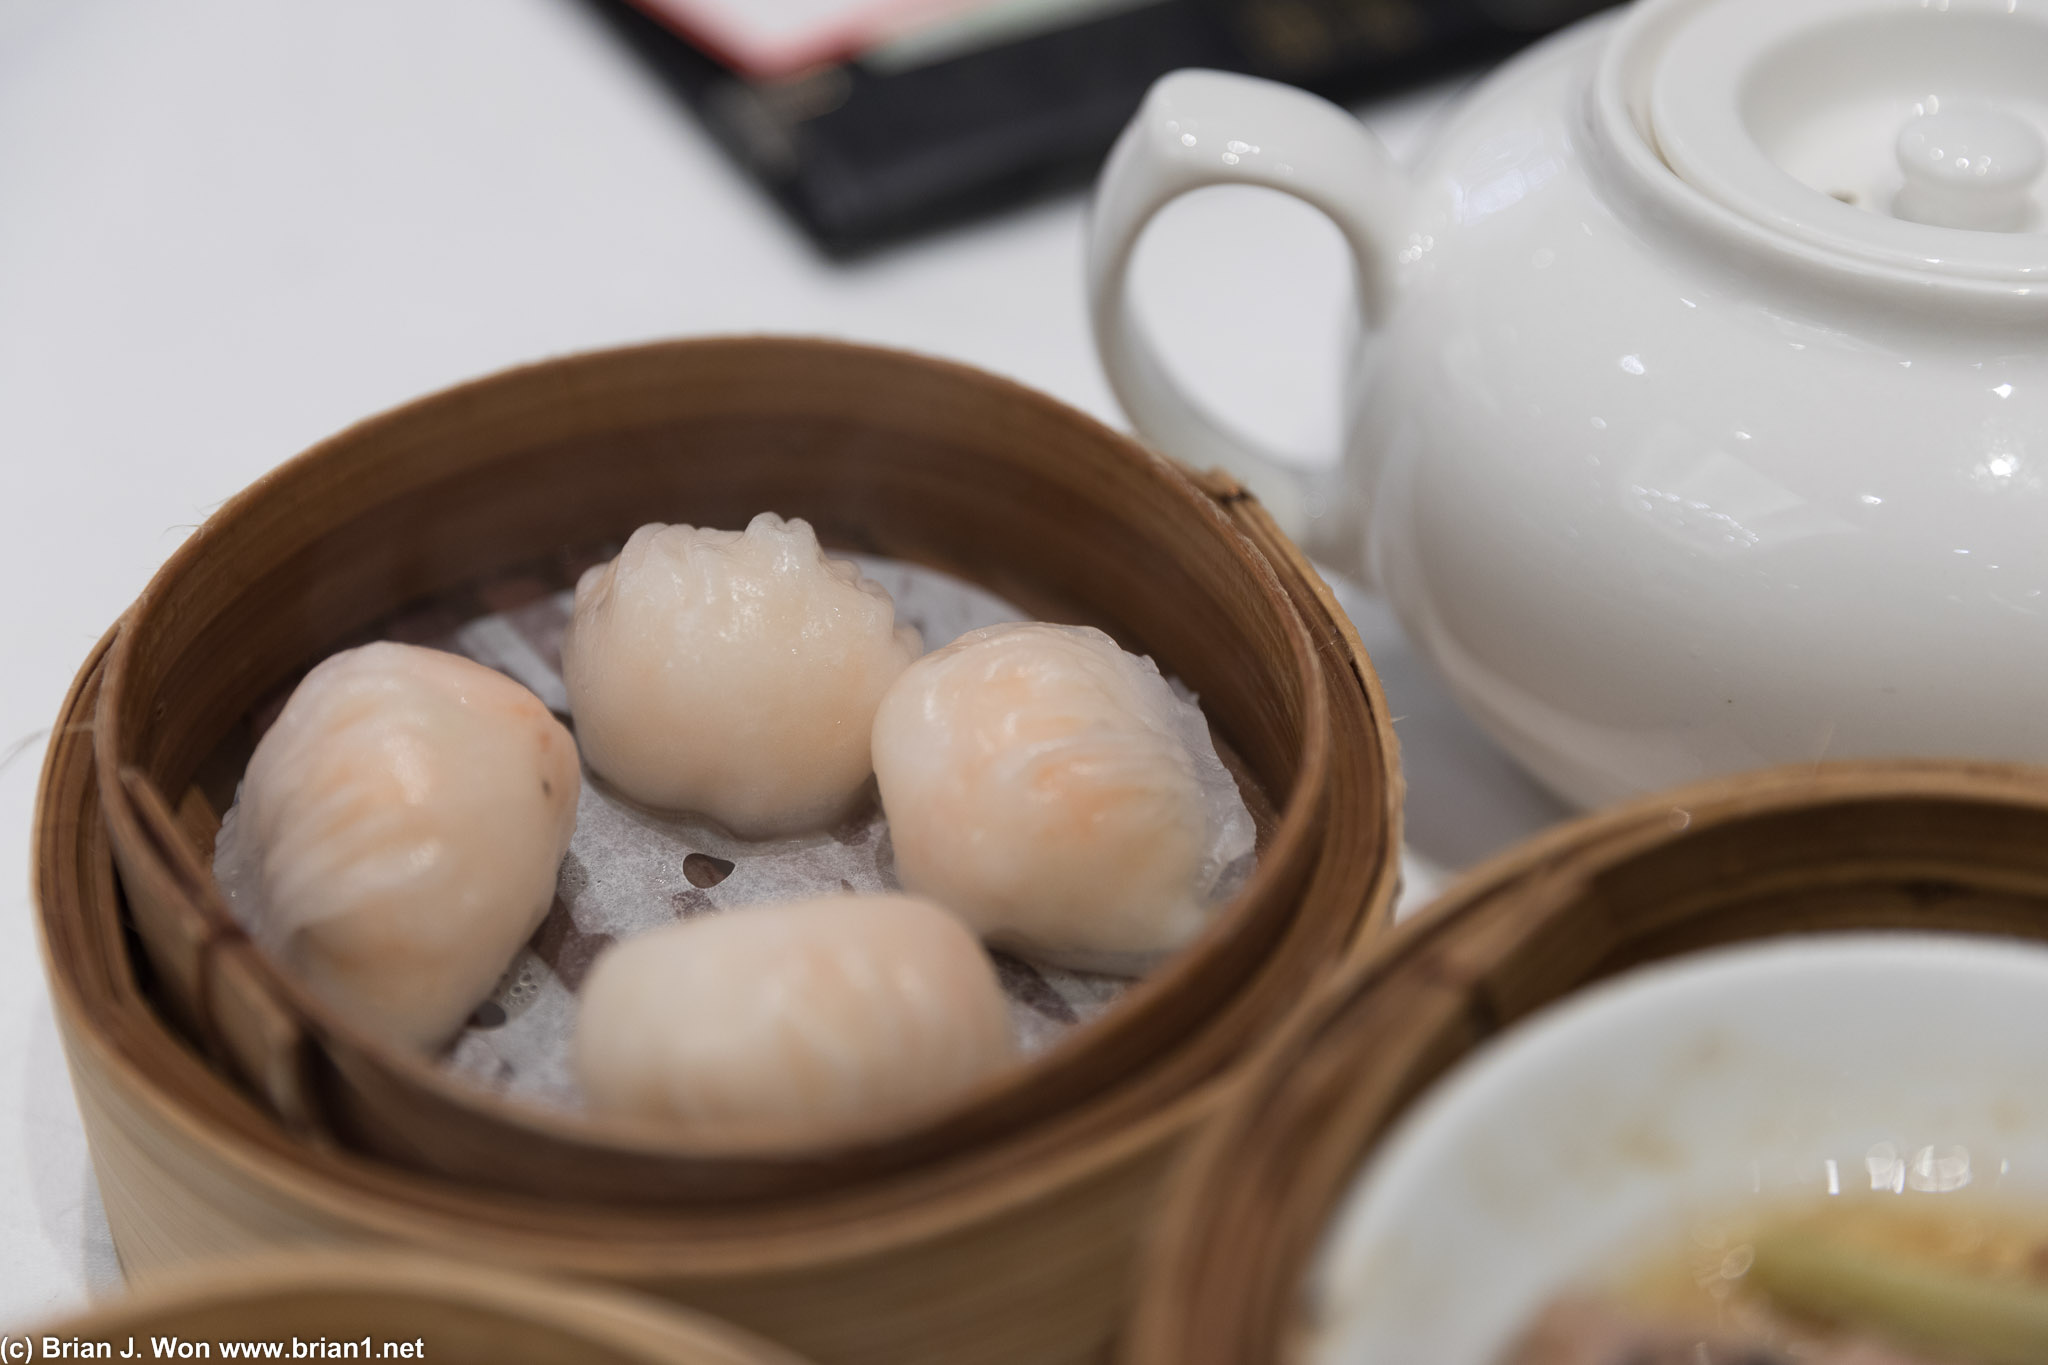 Har gow. Just about right, although not the best I've had.